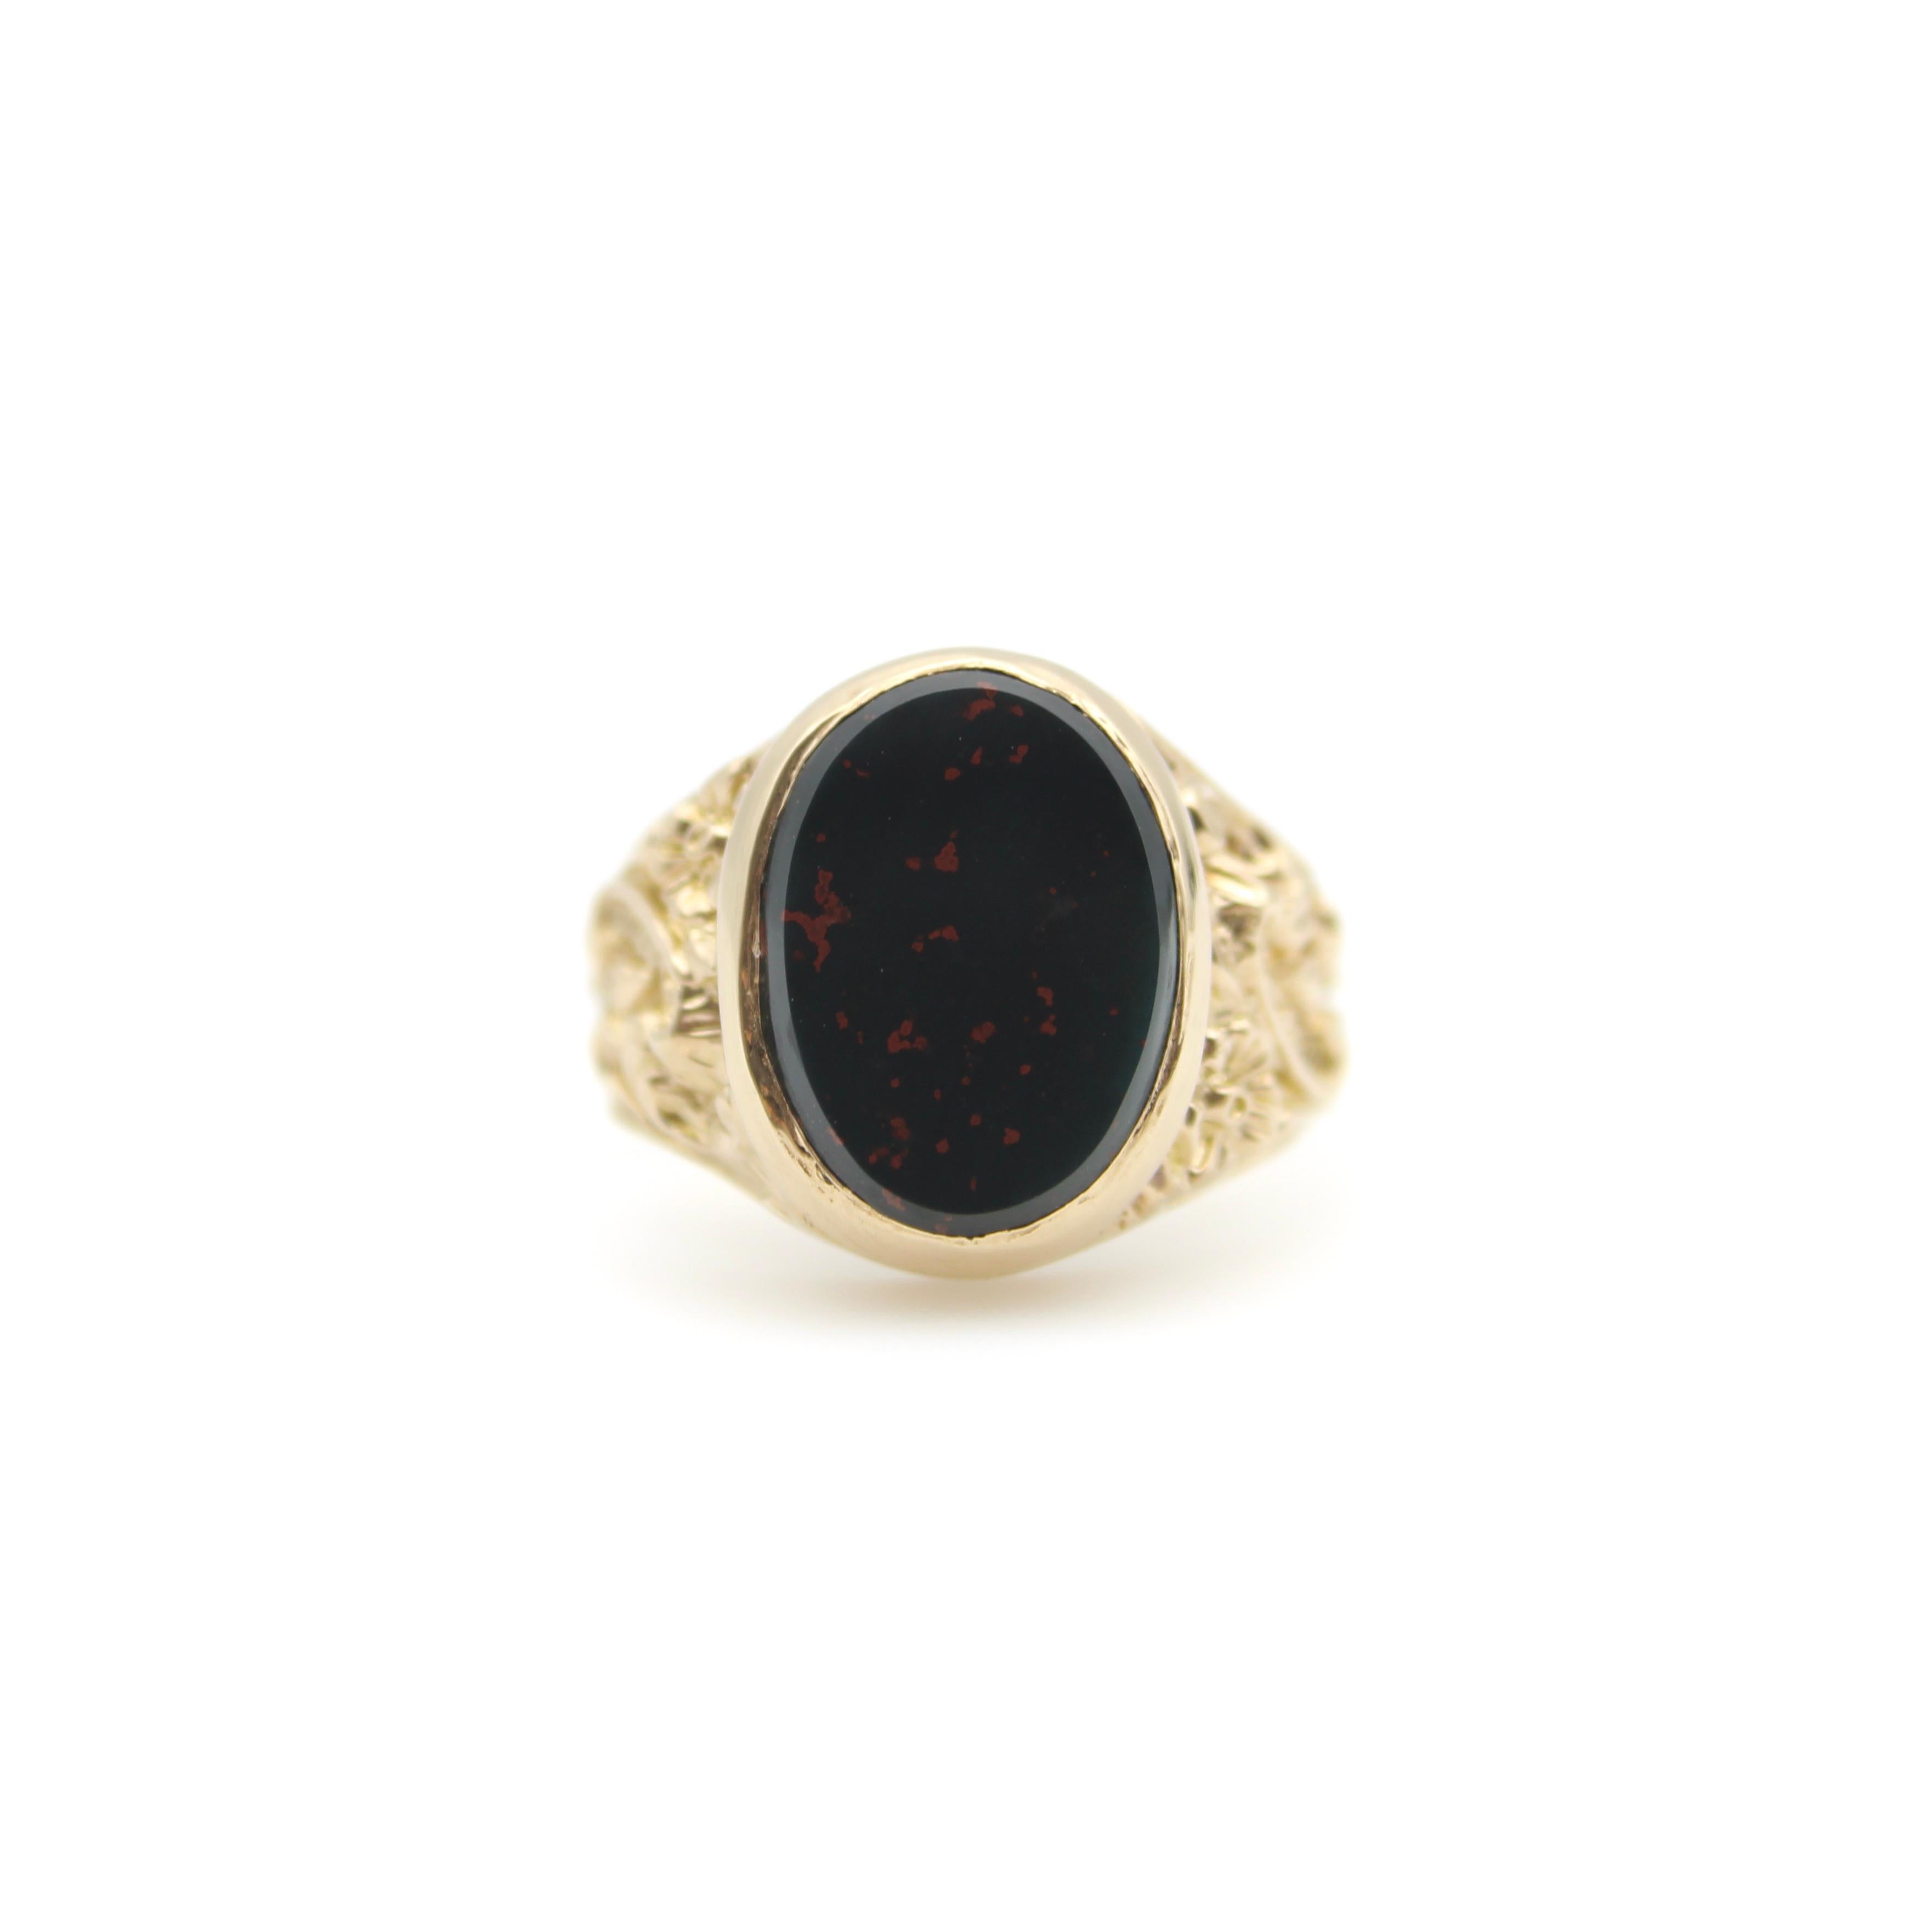 An impressive vintage 9k gold and bloodstone signet ring, done in the style of the Victorian era. The ring features beautiful scrolling foliate details on the band, with an oval red-flecked bloodstone as its centerpiece. 

Bloodstone has been